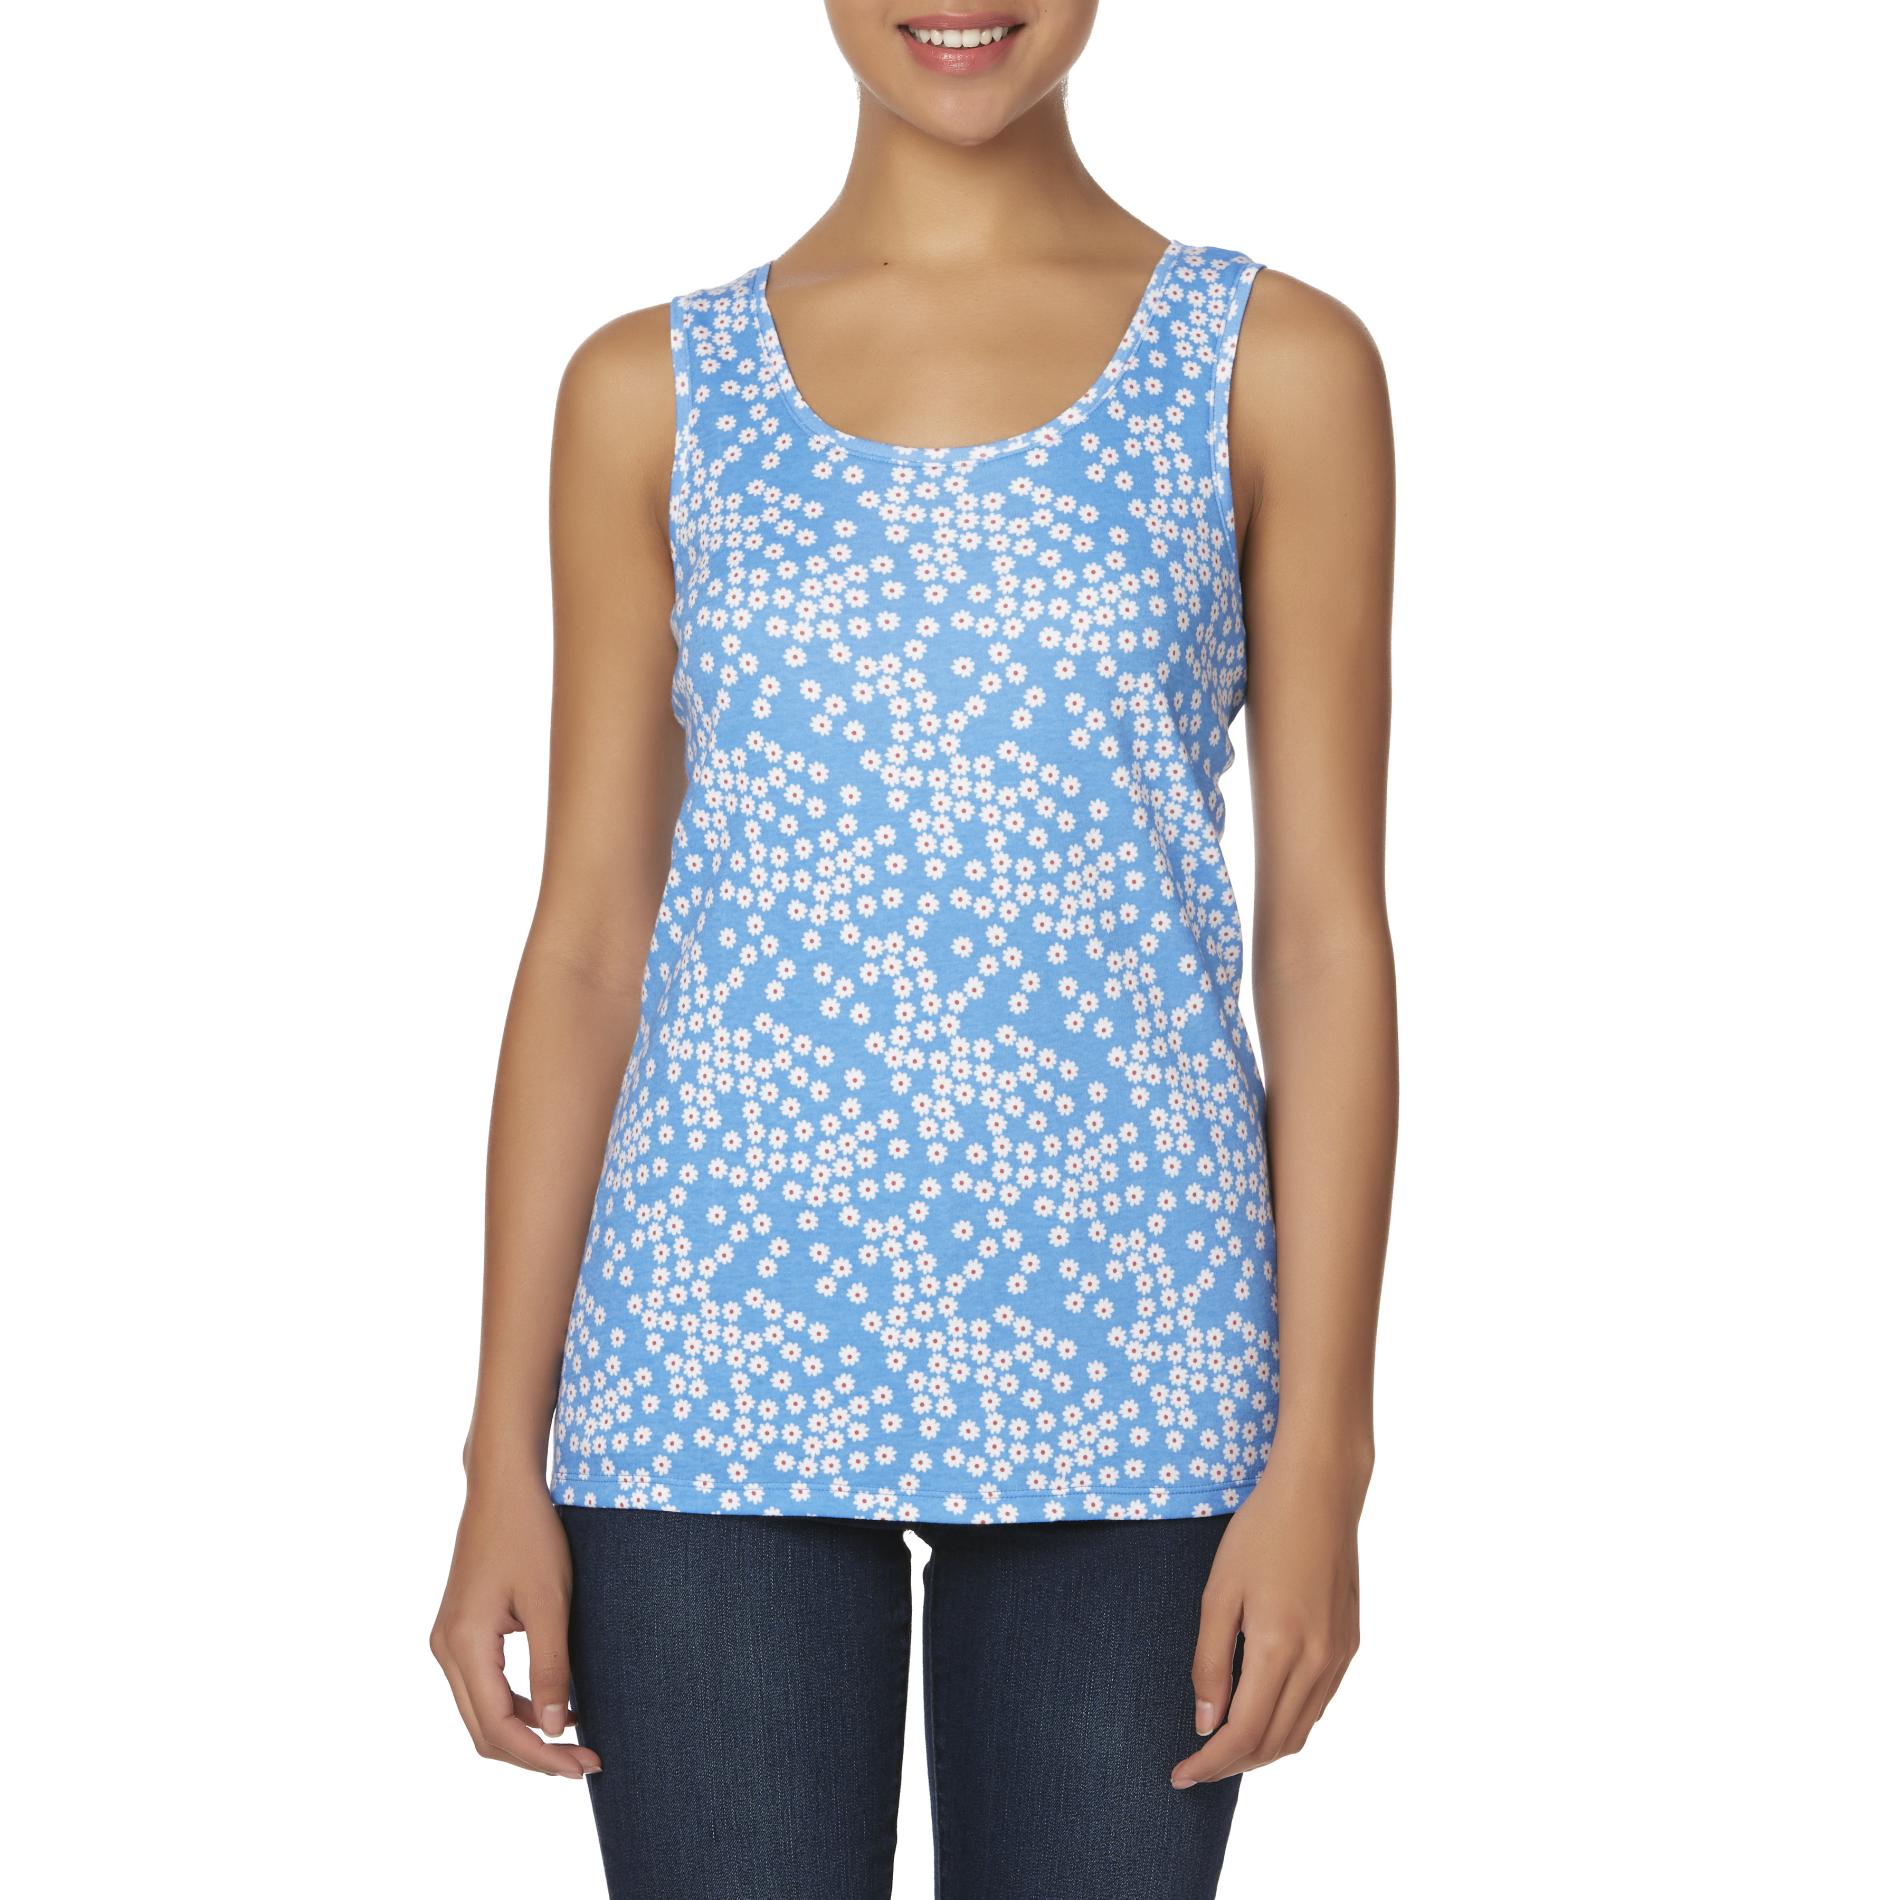 Basic Editions Women's Tank Top - Ditsy Floral